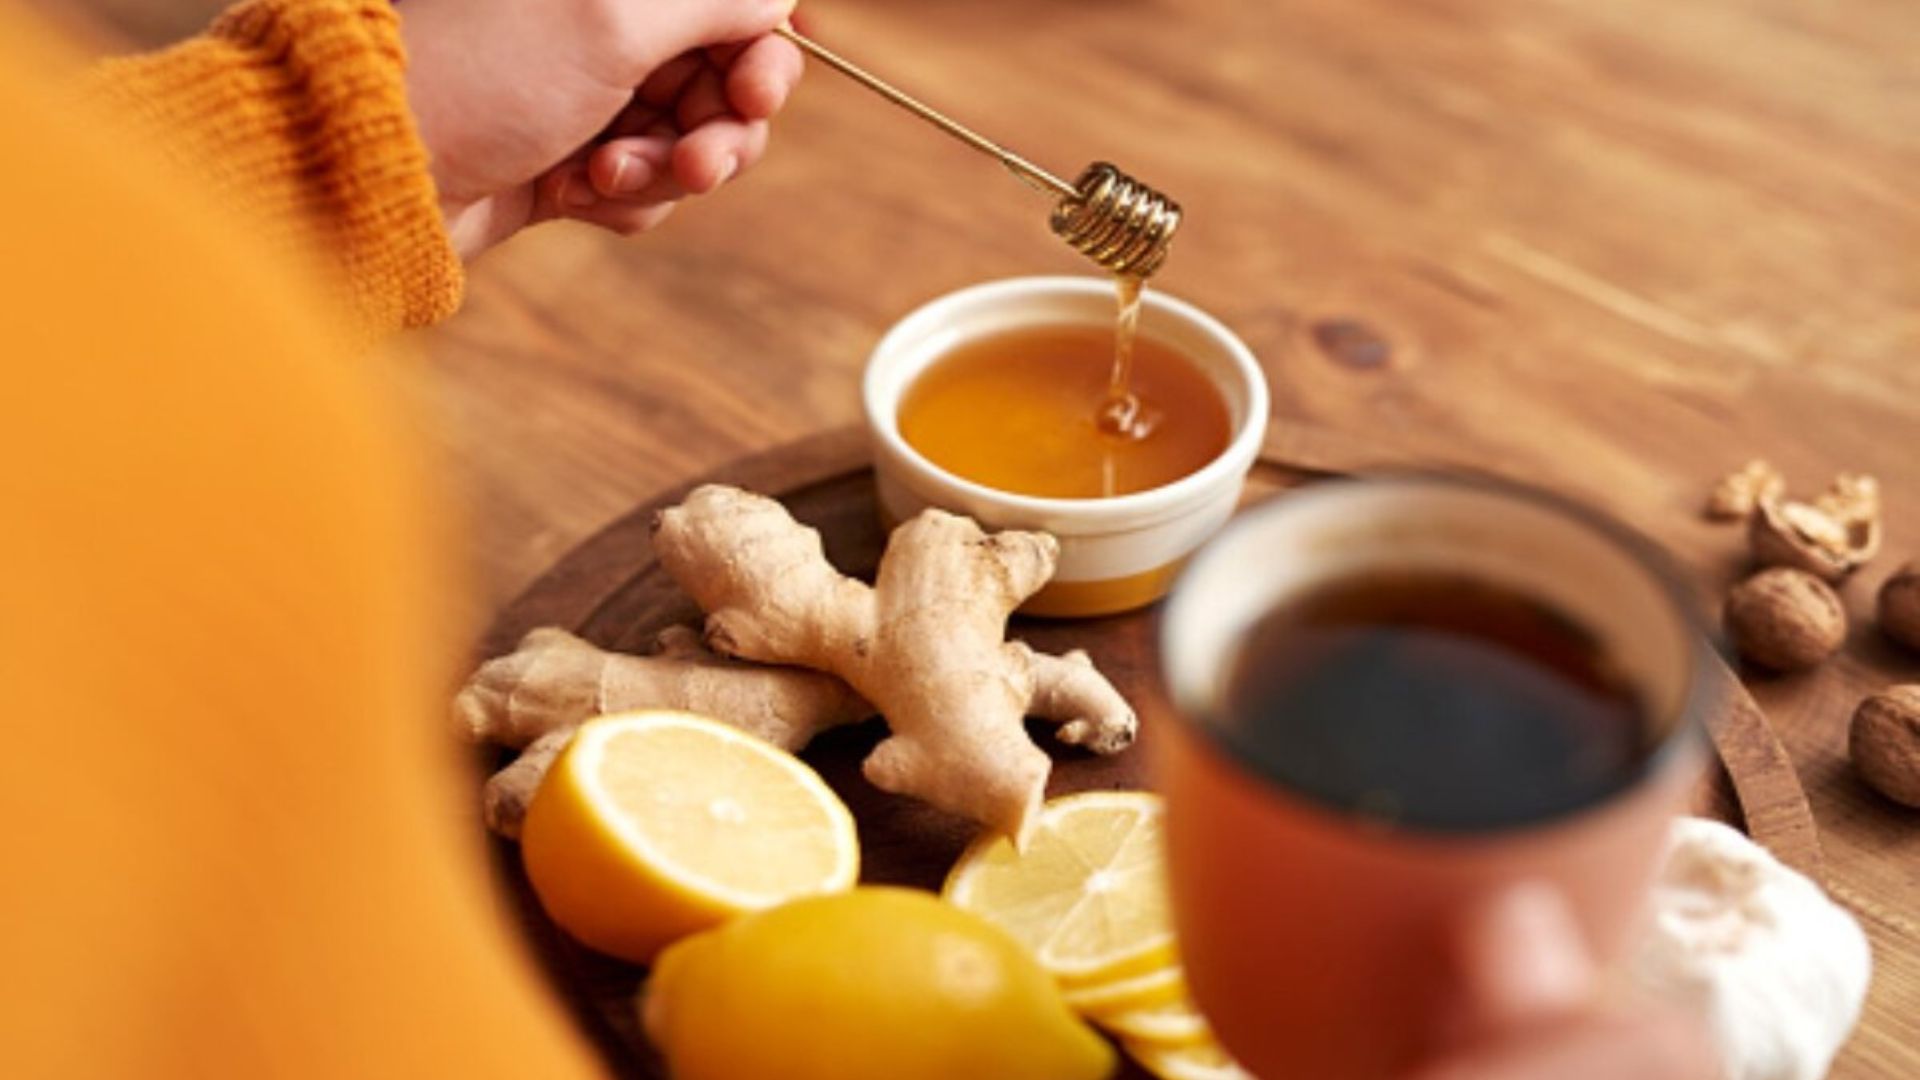 Making Cough Syrup With Honey, Ginger And Lemon